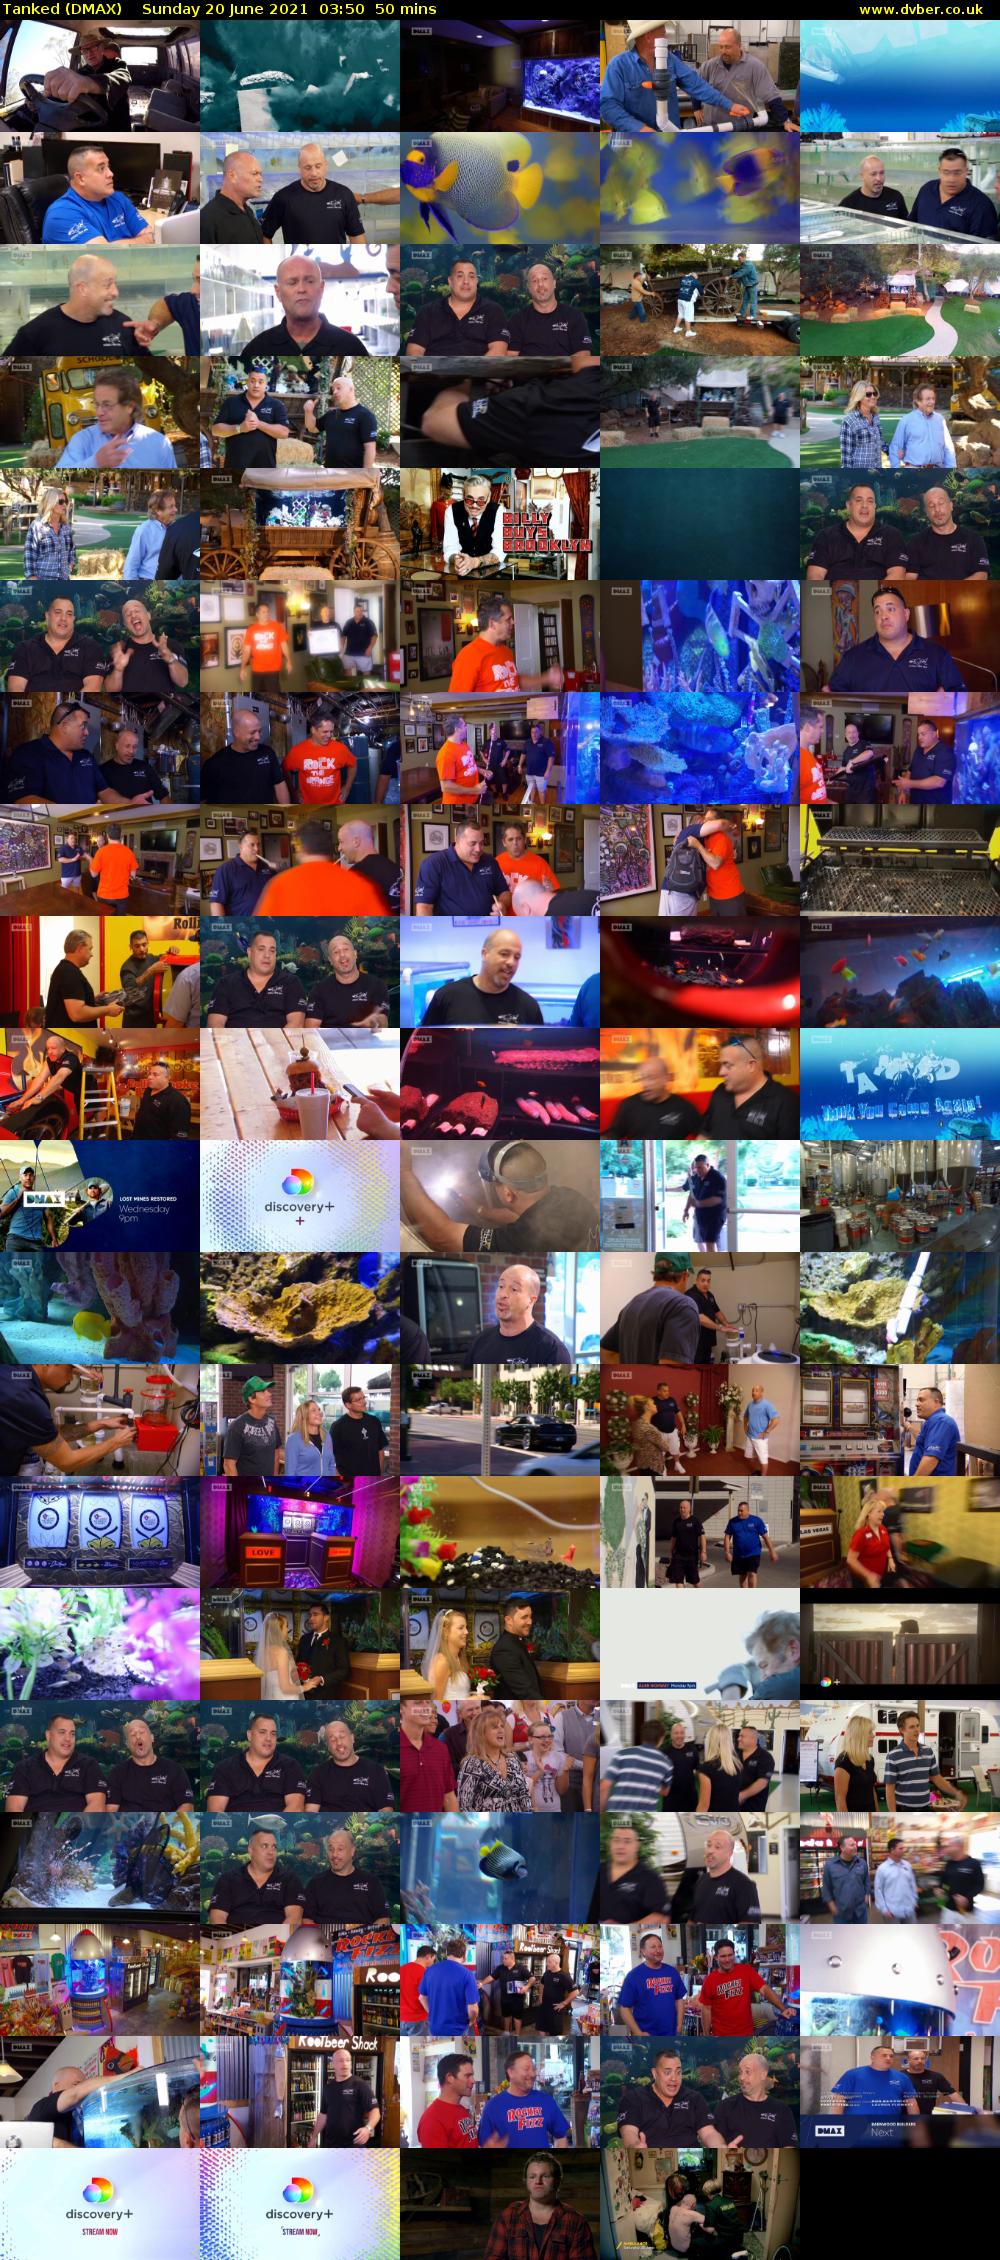 Tanked (DMAX) Sunday 20 June 2021 03:50 - 04:40